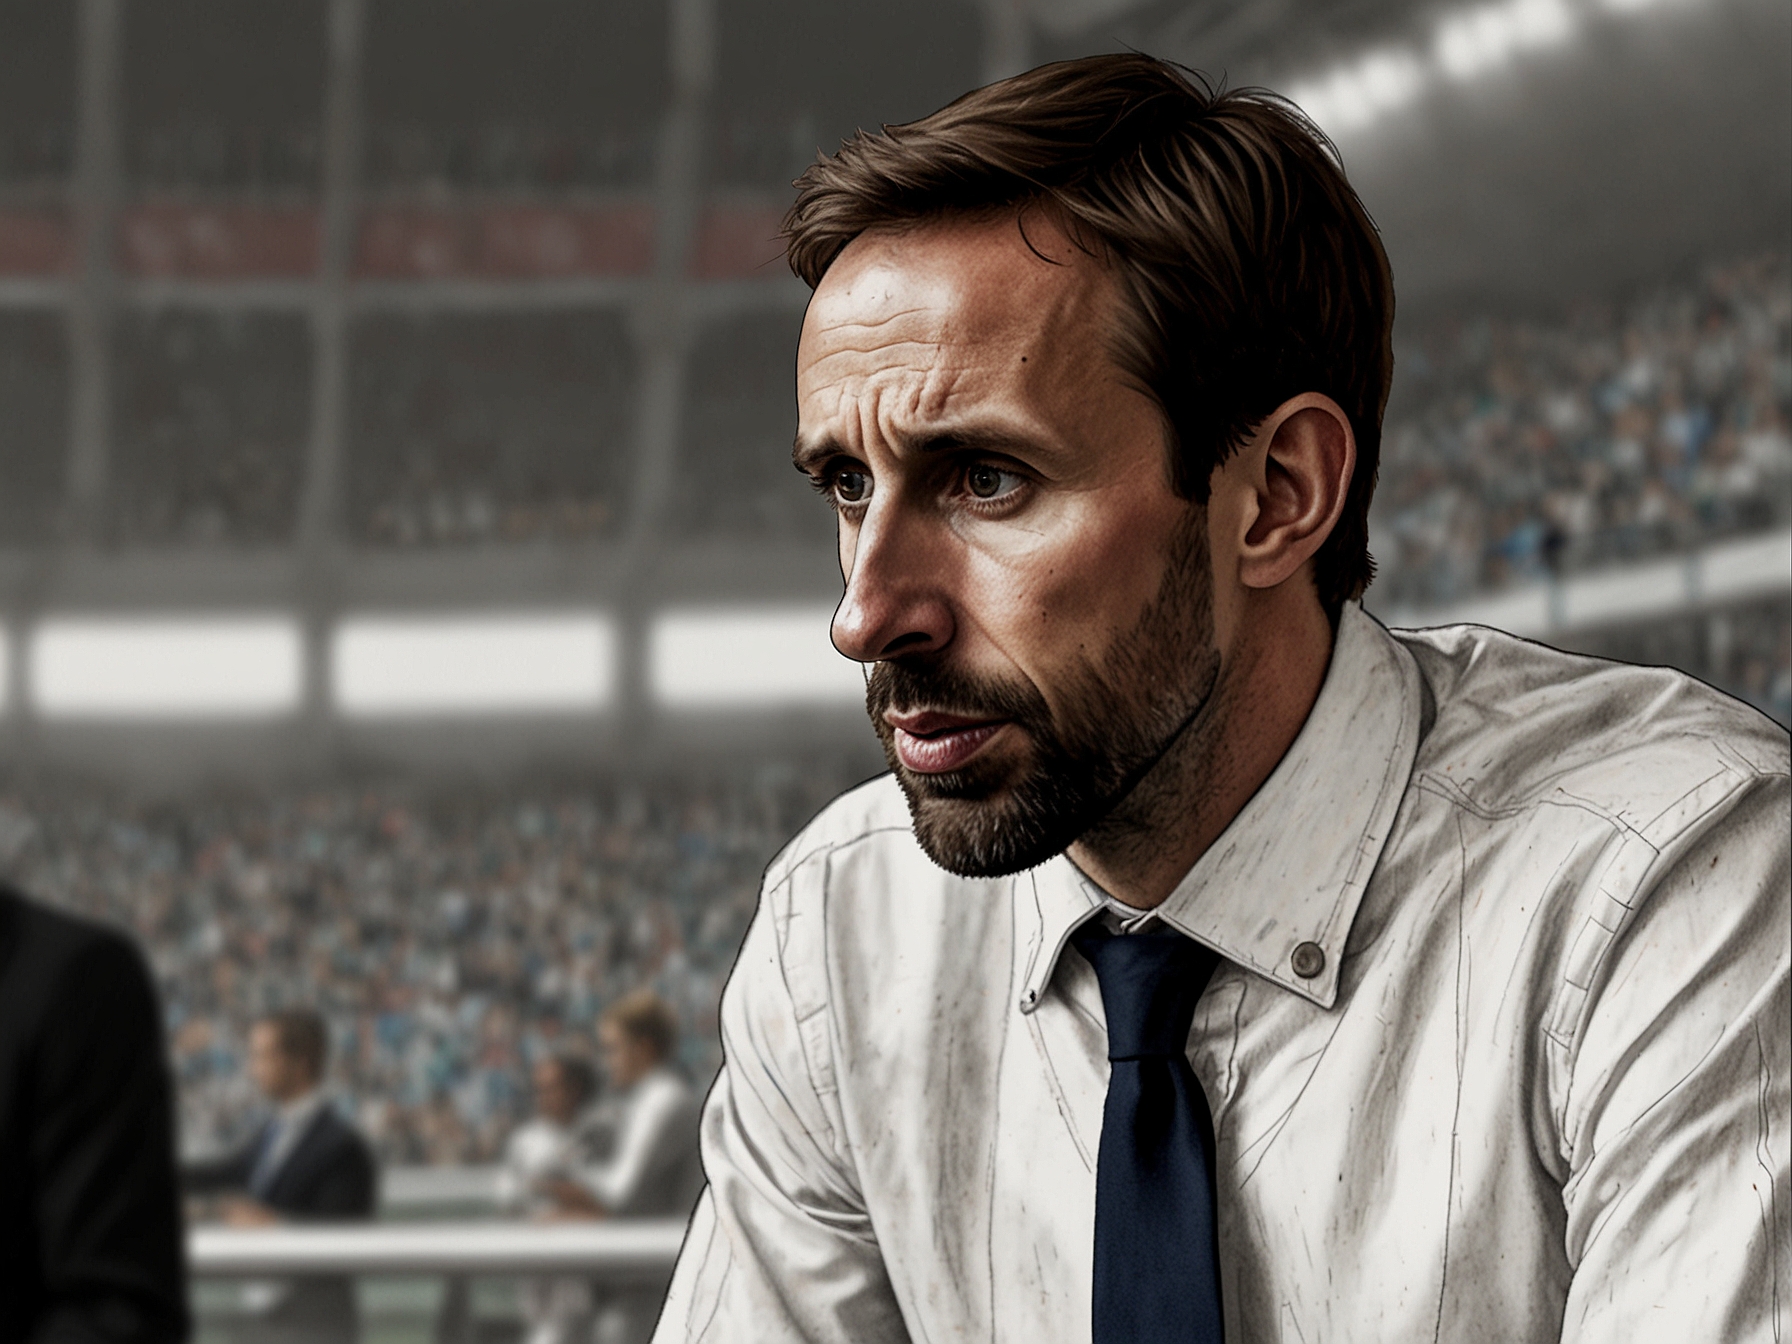 Gareth Southgate strategizing during an England football match, highlighting his role as a transformative leader.